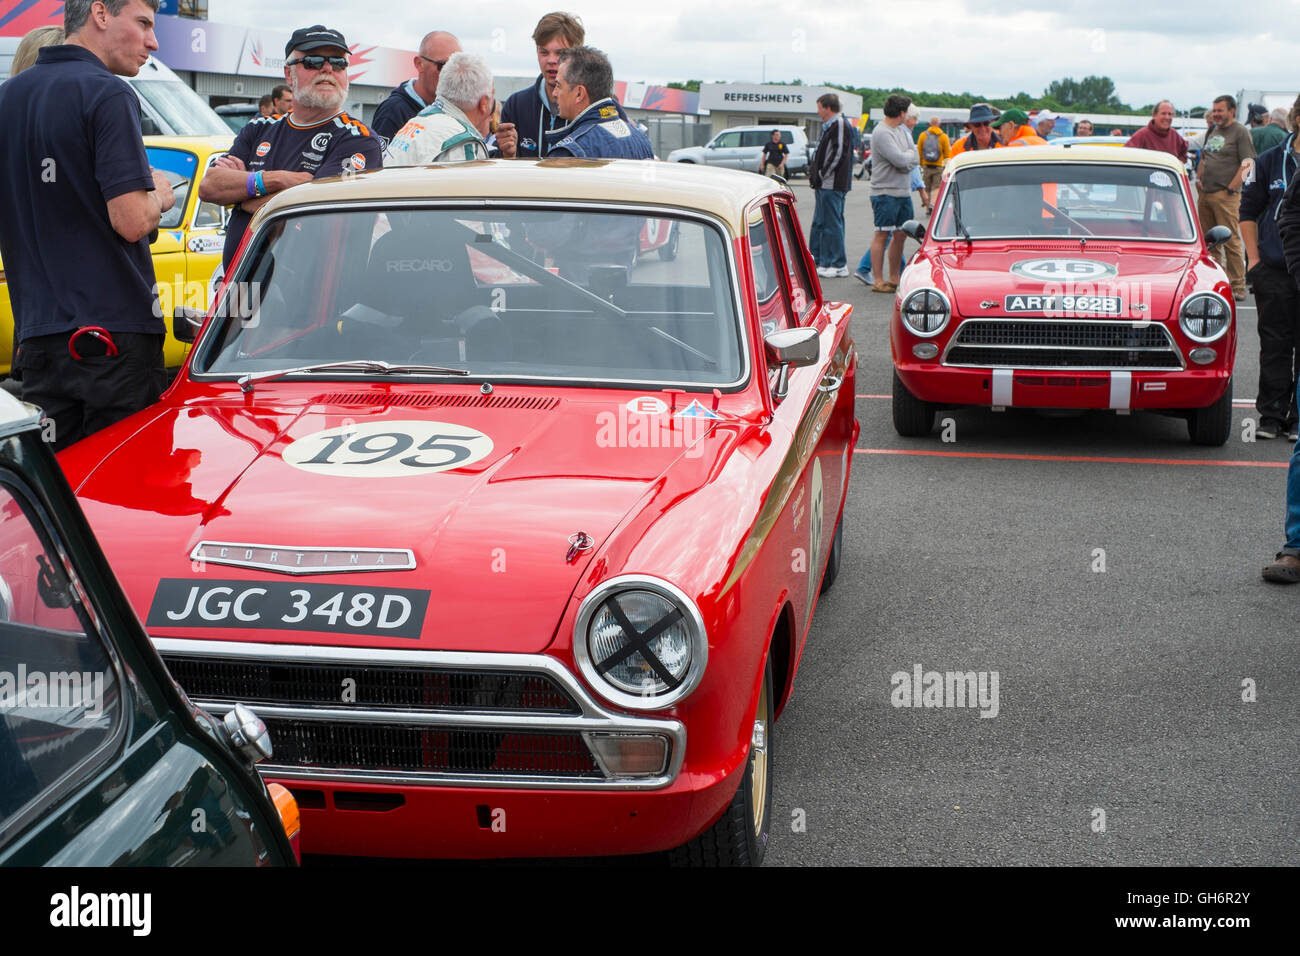 Ford Lotus Cortinas in the paddock ready to race at the 2016 Silverstone Classic event Stock Photo